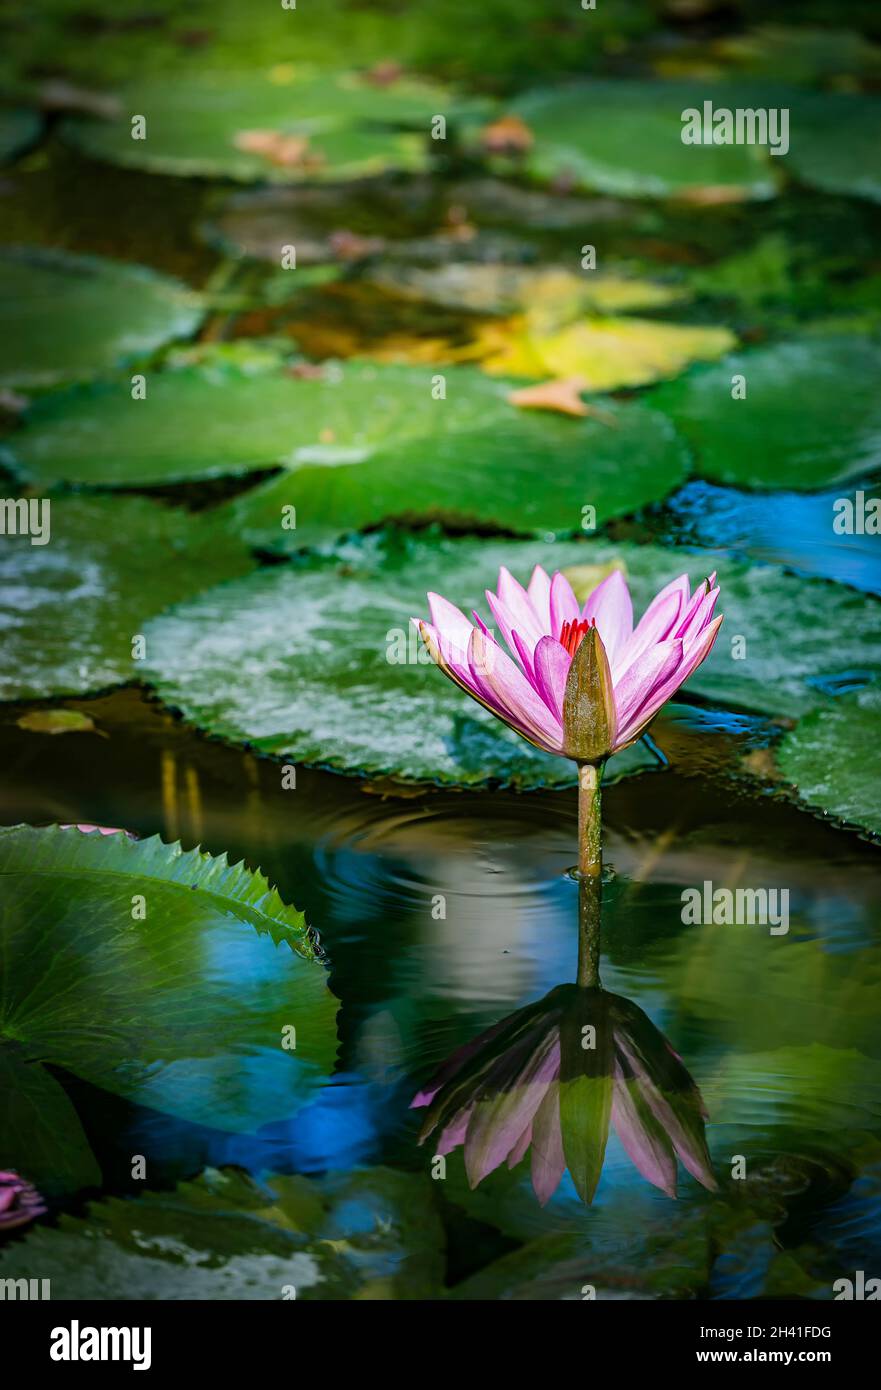 Beautiful pink purple flower of water lily or lotus flower Nymphaea in old verdurous pond. Big leaves of waterlily cover water surface. Water plant co Stock Photo